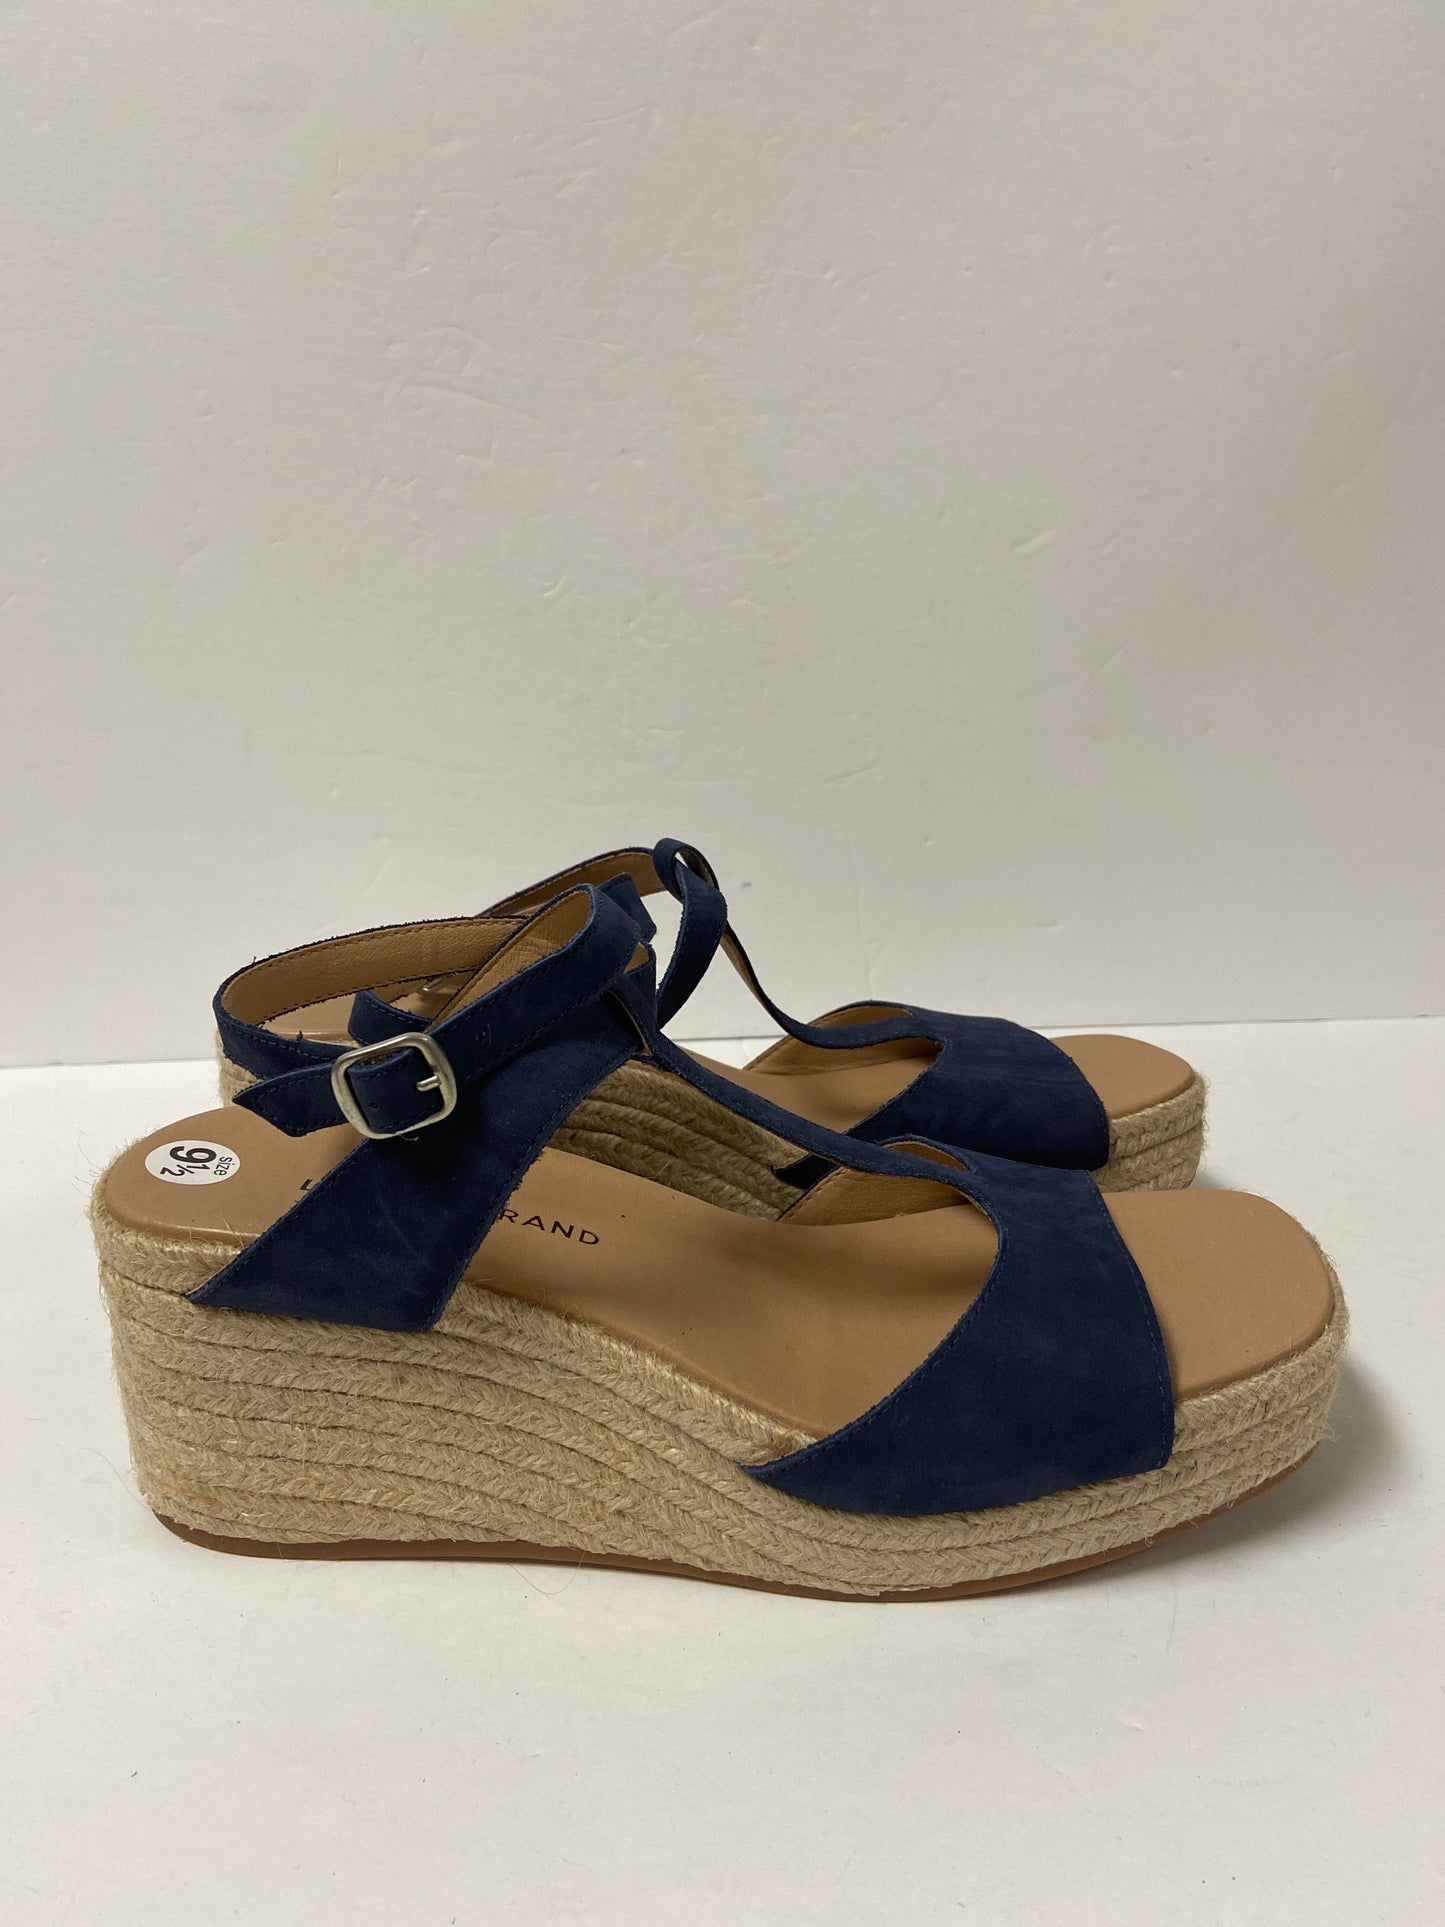 Sandals Heels Wedge By Lucky Brand  Size: 9.5